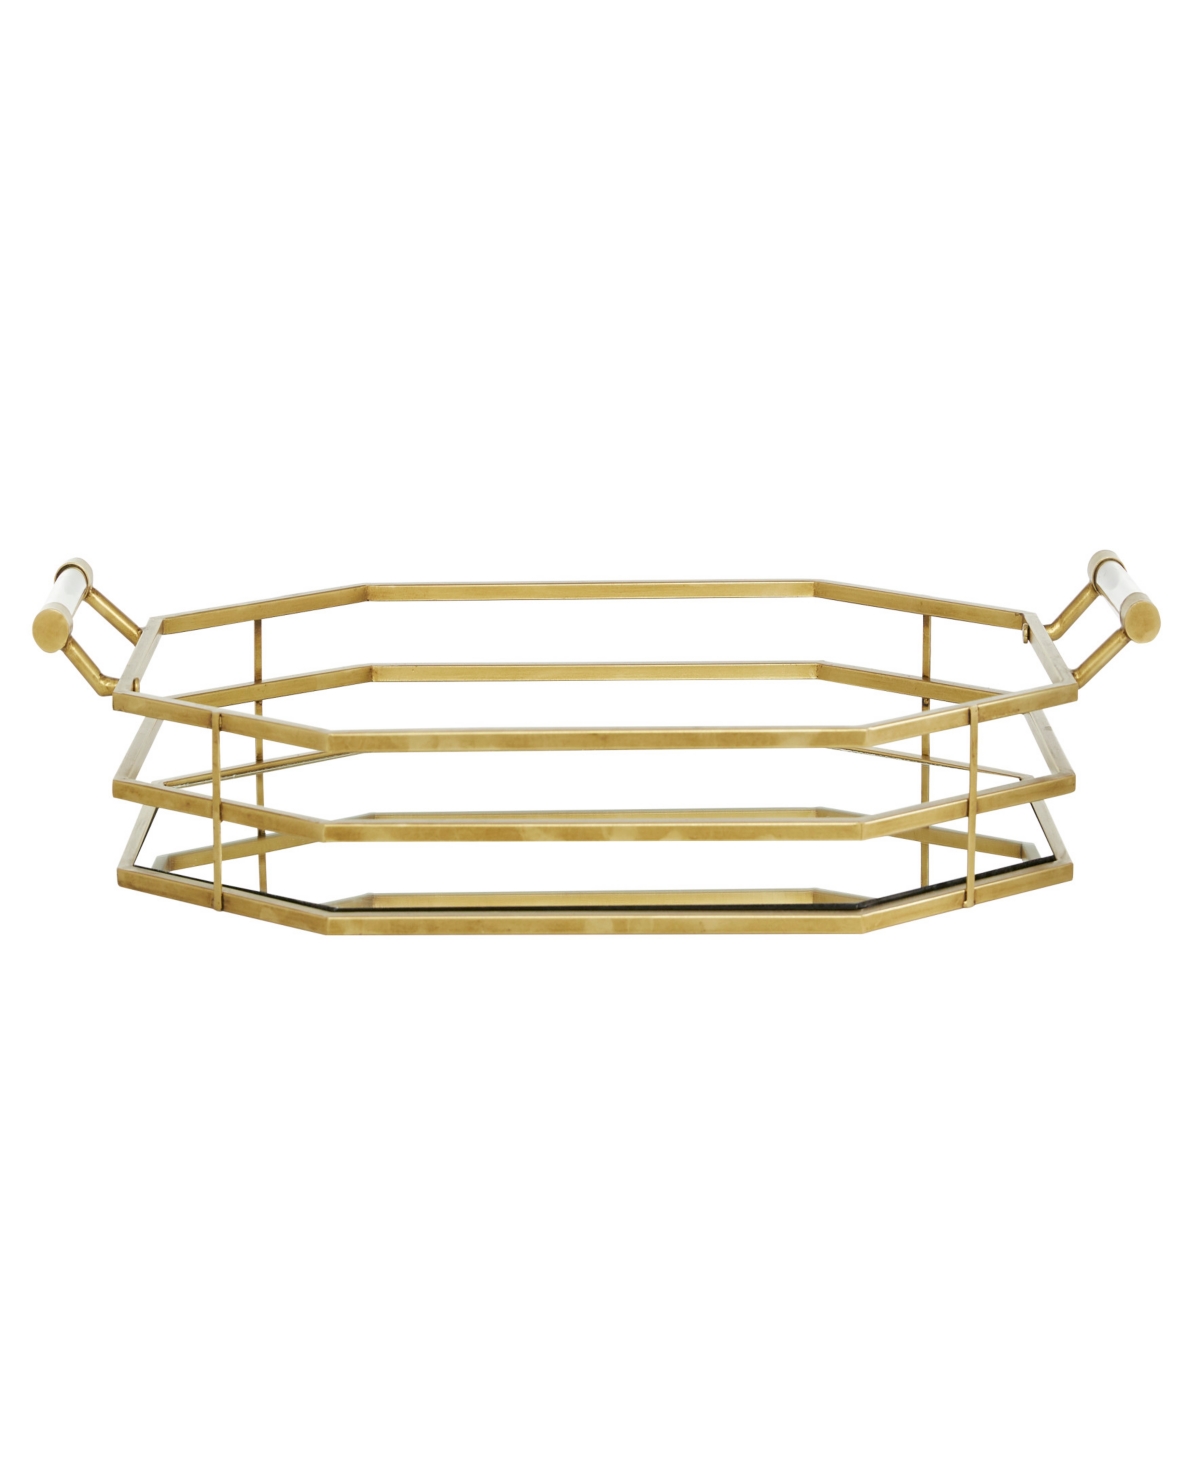 Cosmoliving By Cosmopolitan Metal Mirrored Tray, 27" X 16" X 6" In Gold